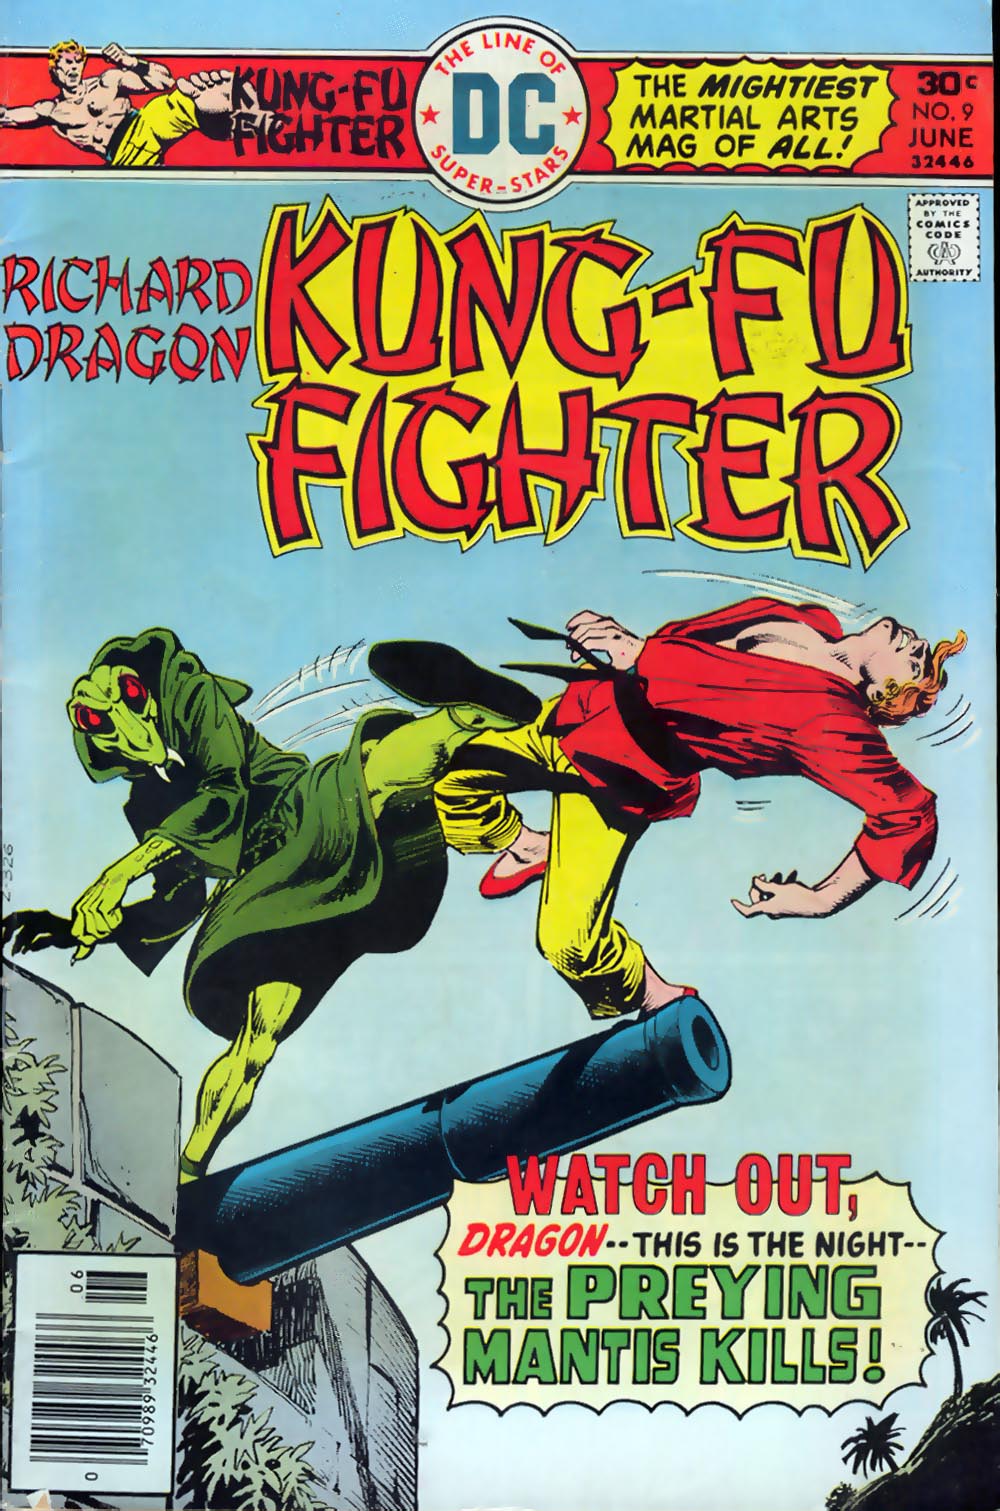 Read online Richard Dragon, Kung-Fu Fighter comic -  Issue #9 - 1